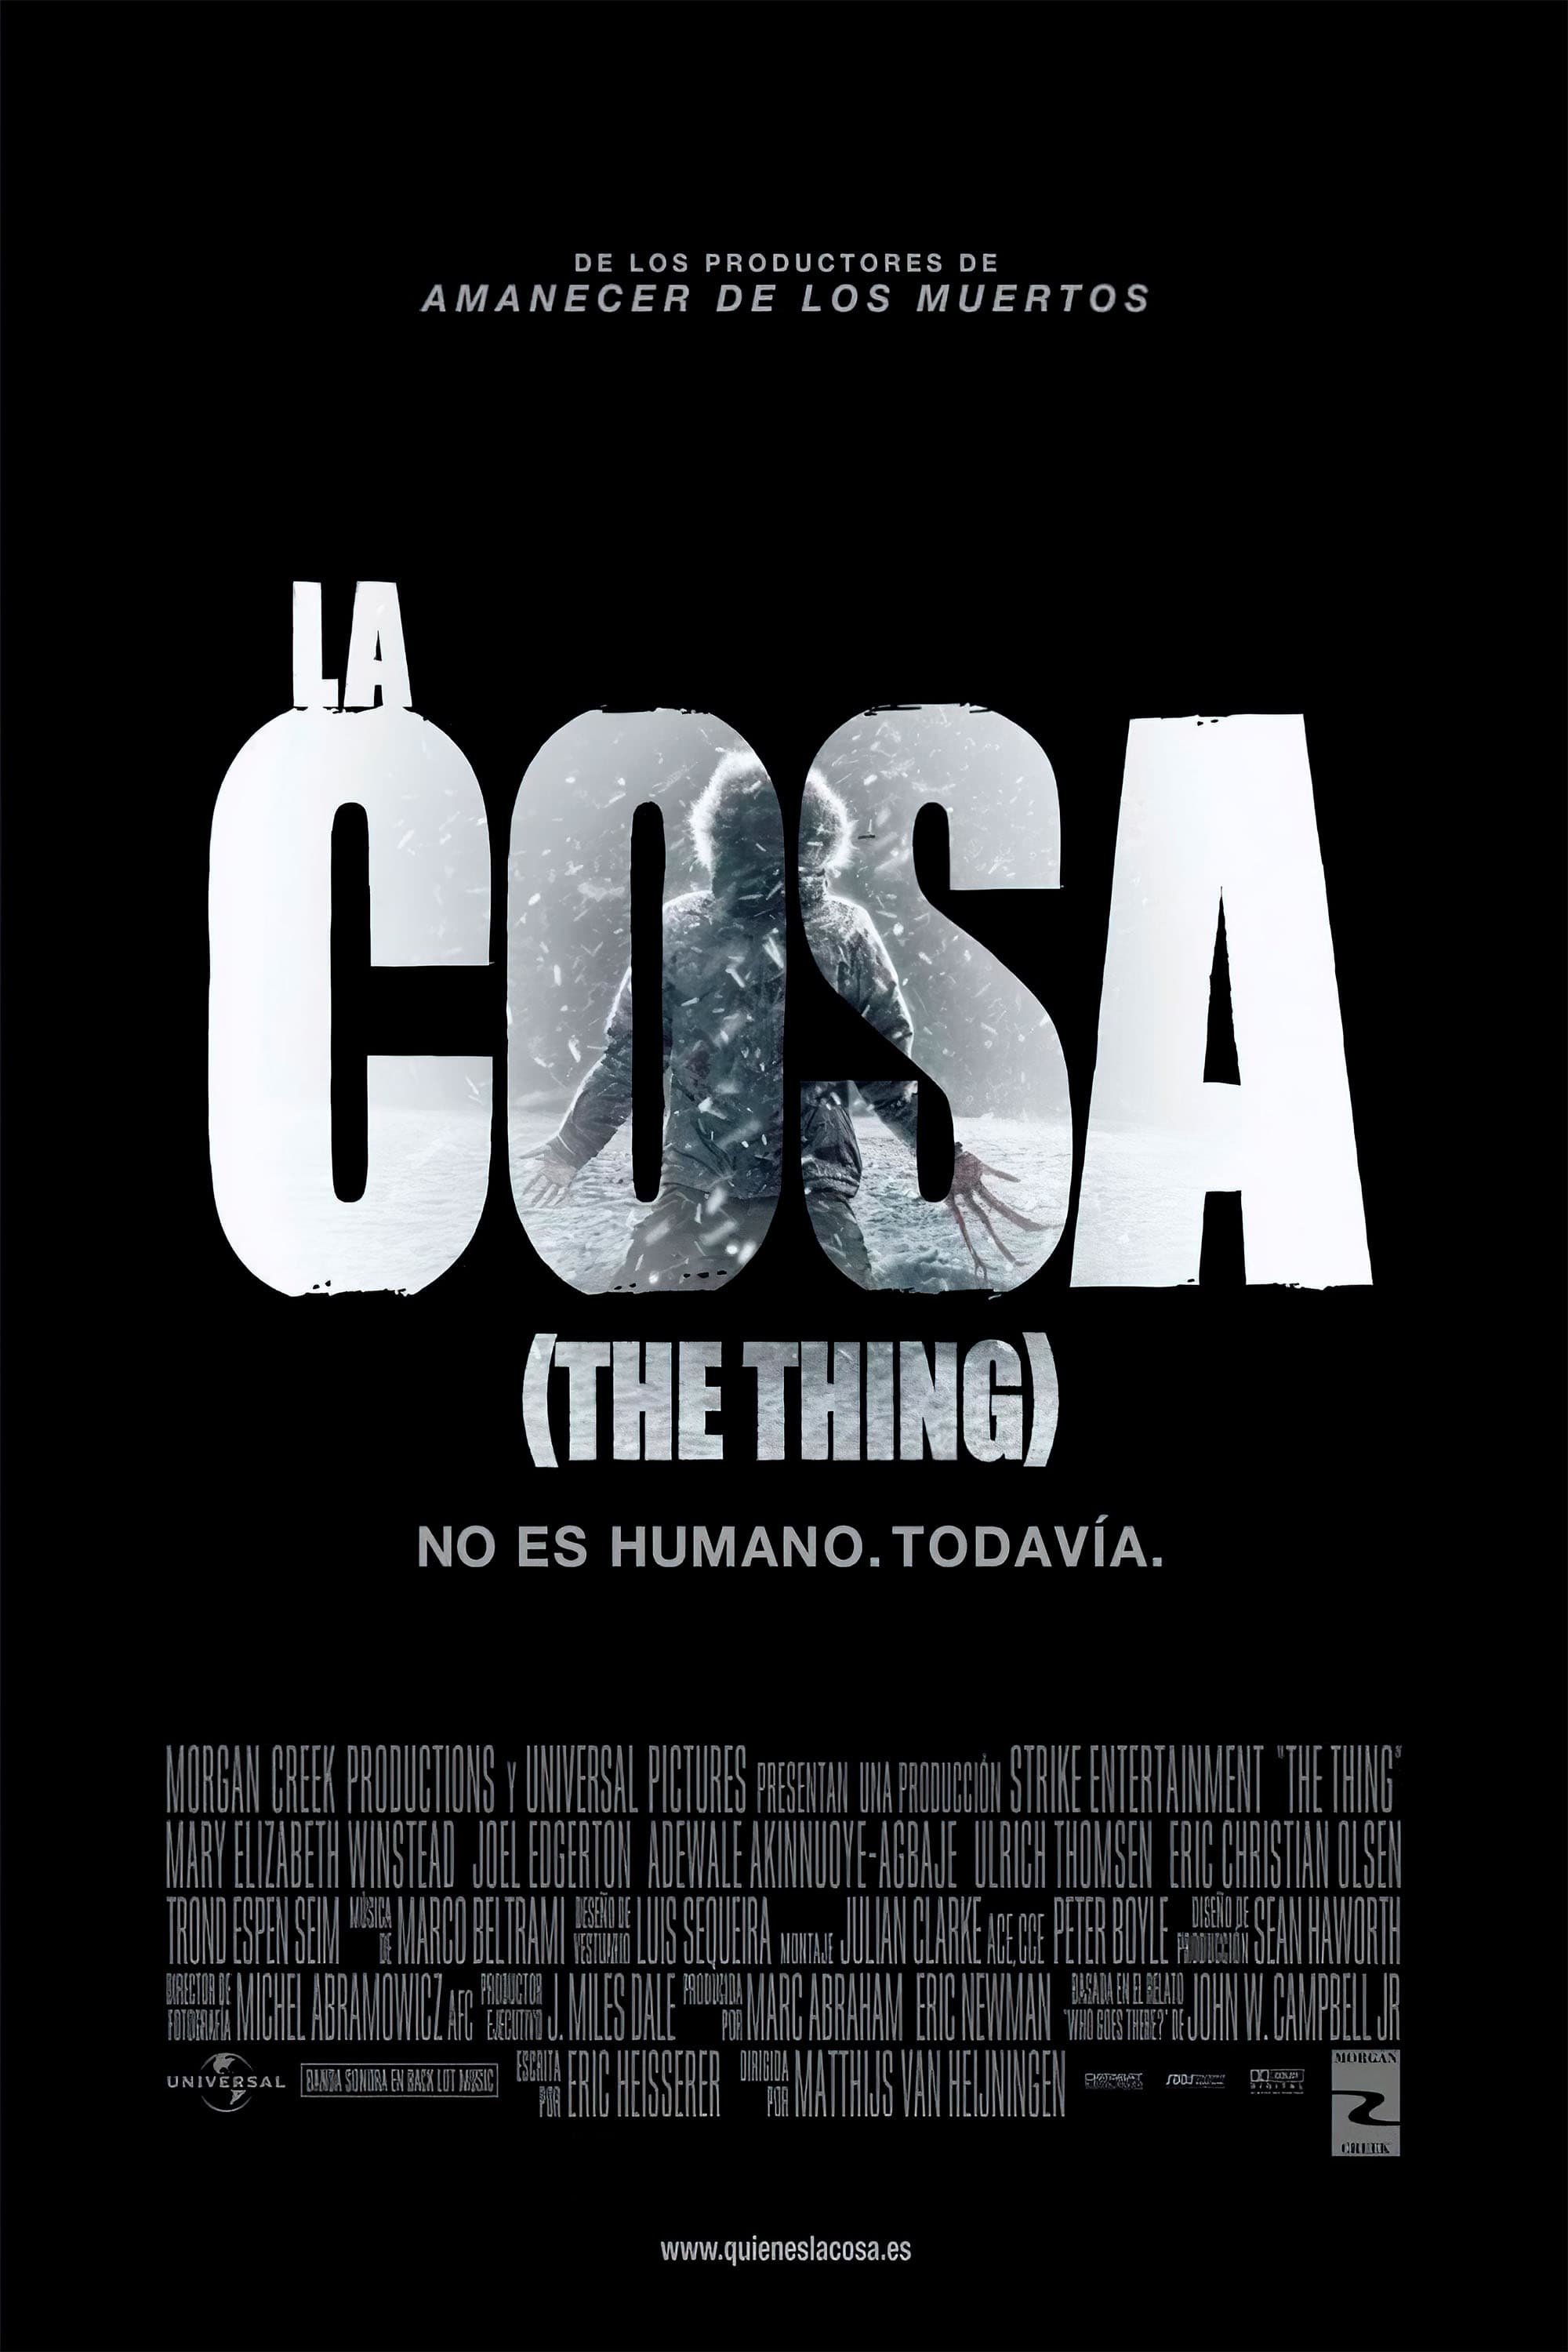 La cosa (The Thing) poster